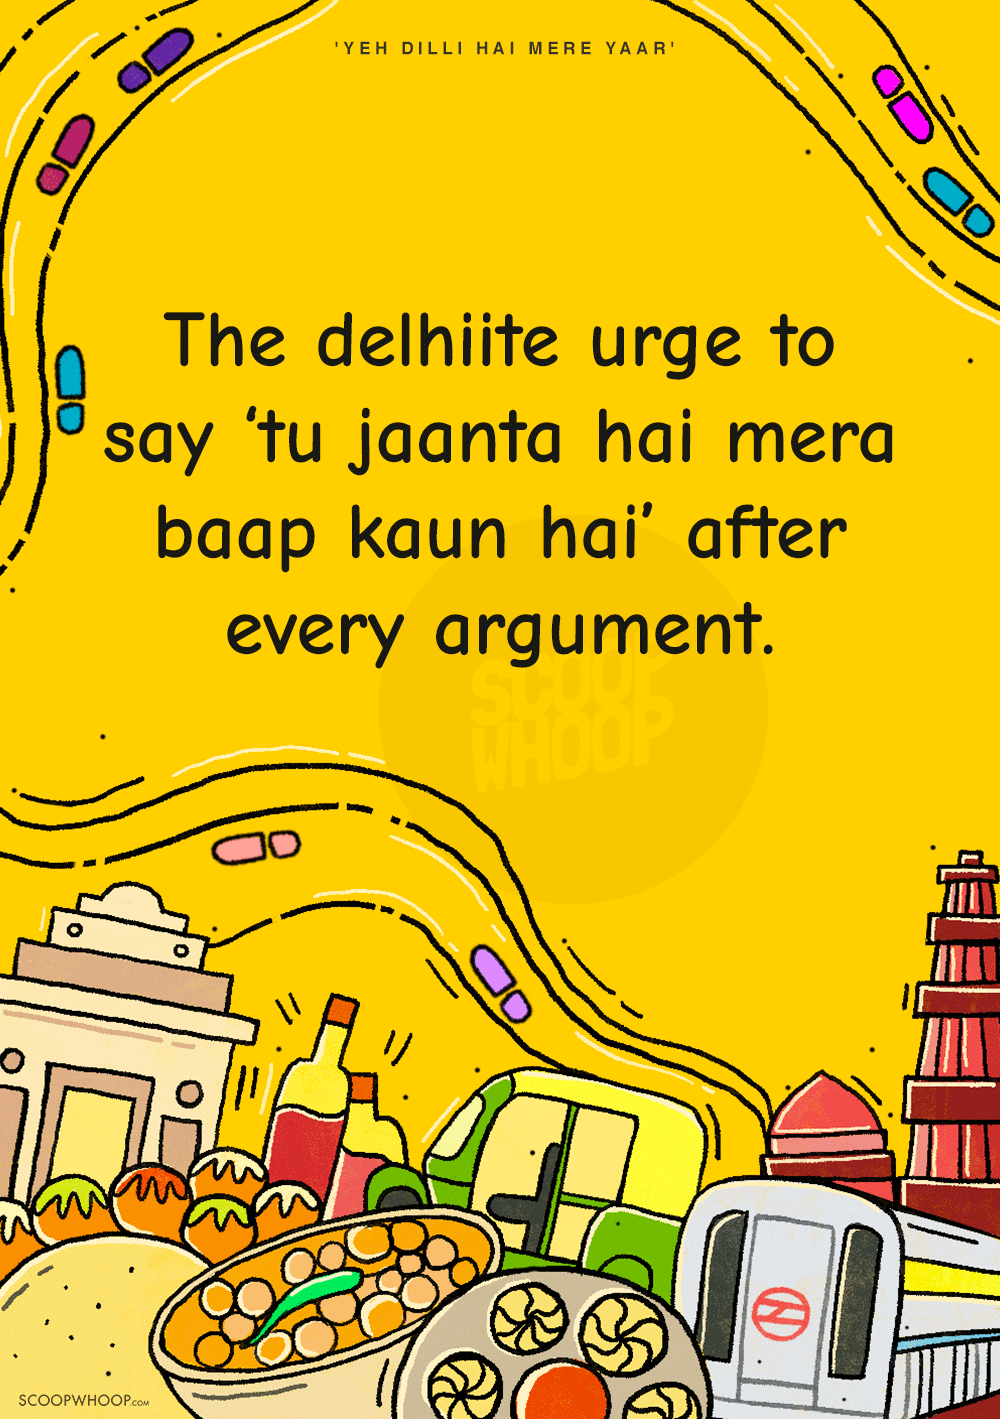 18 Accurate Urges That Only A True Dilliwaala Would Relate To